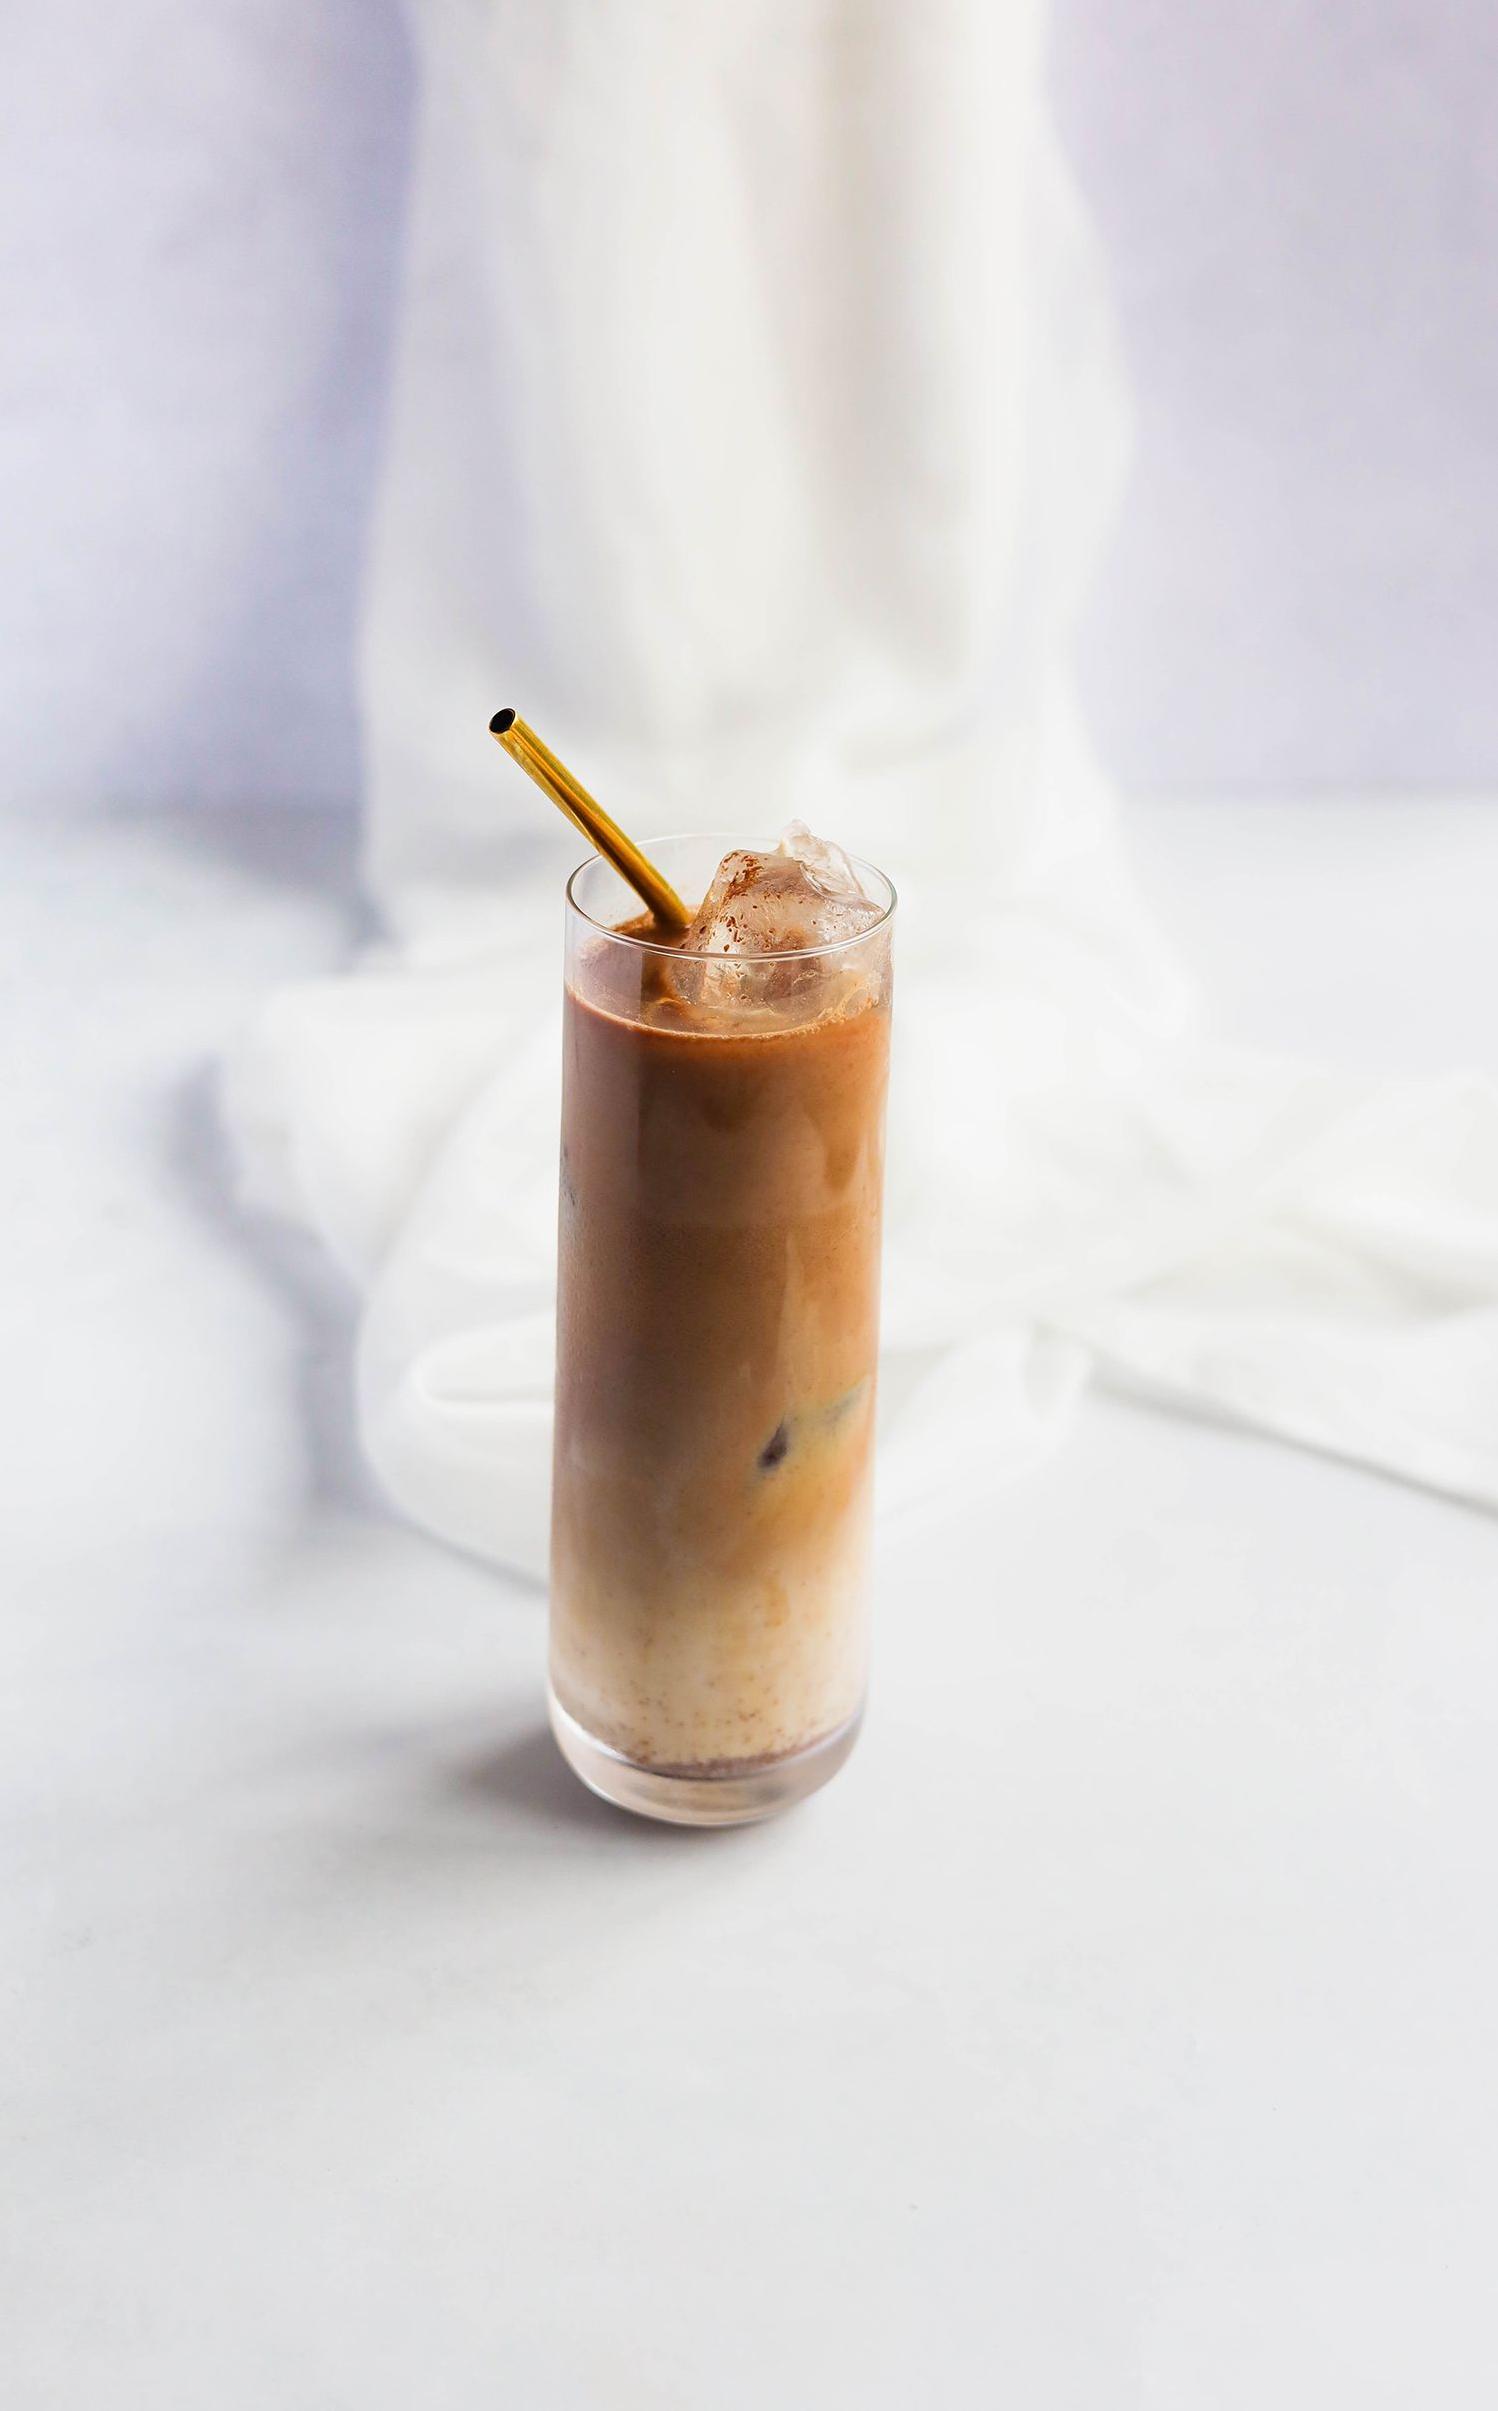  Satisfy your caffeine and chocolate cravings with one delicious sip.